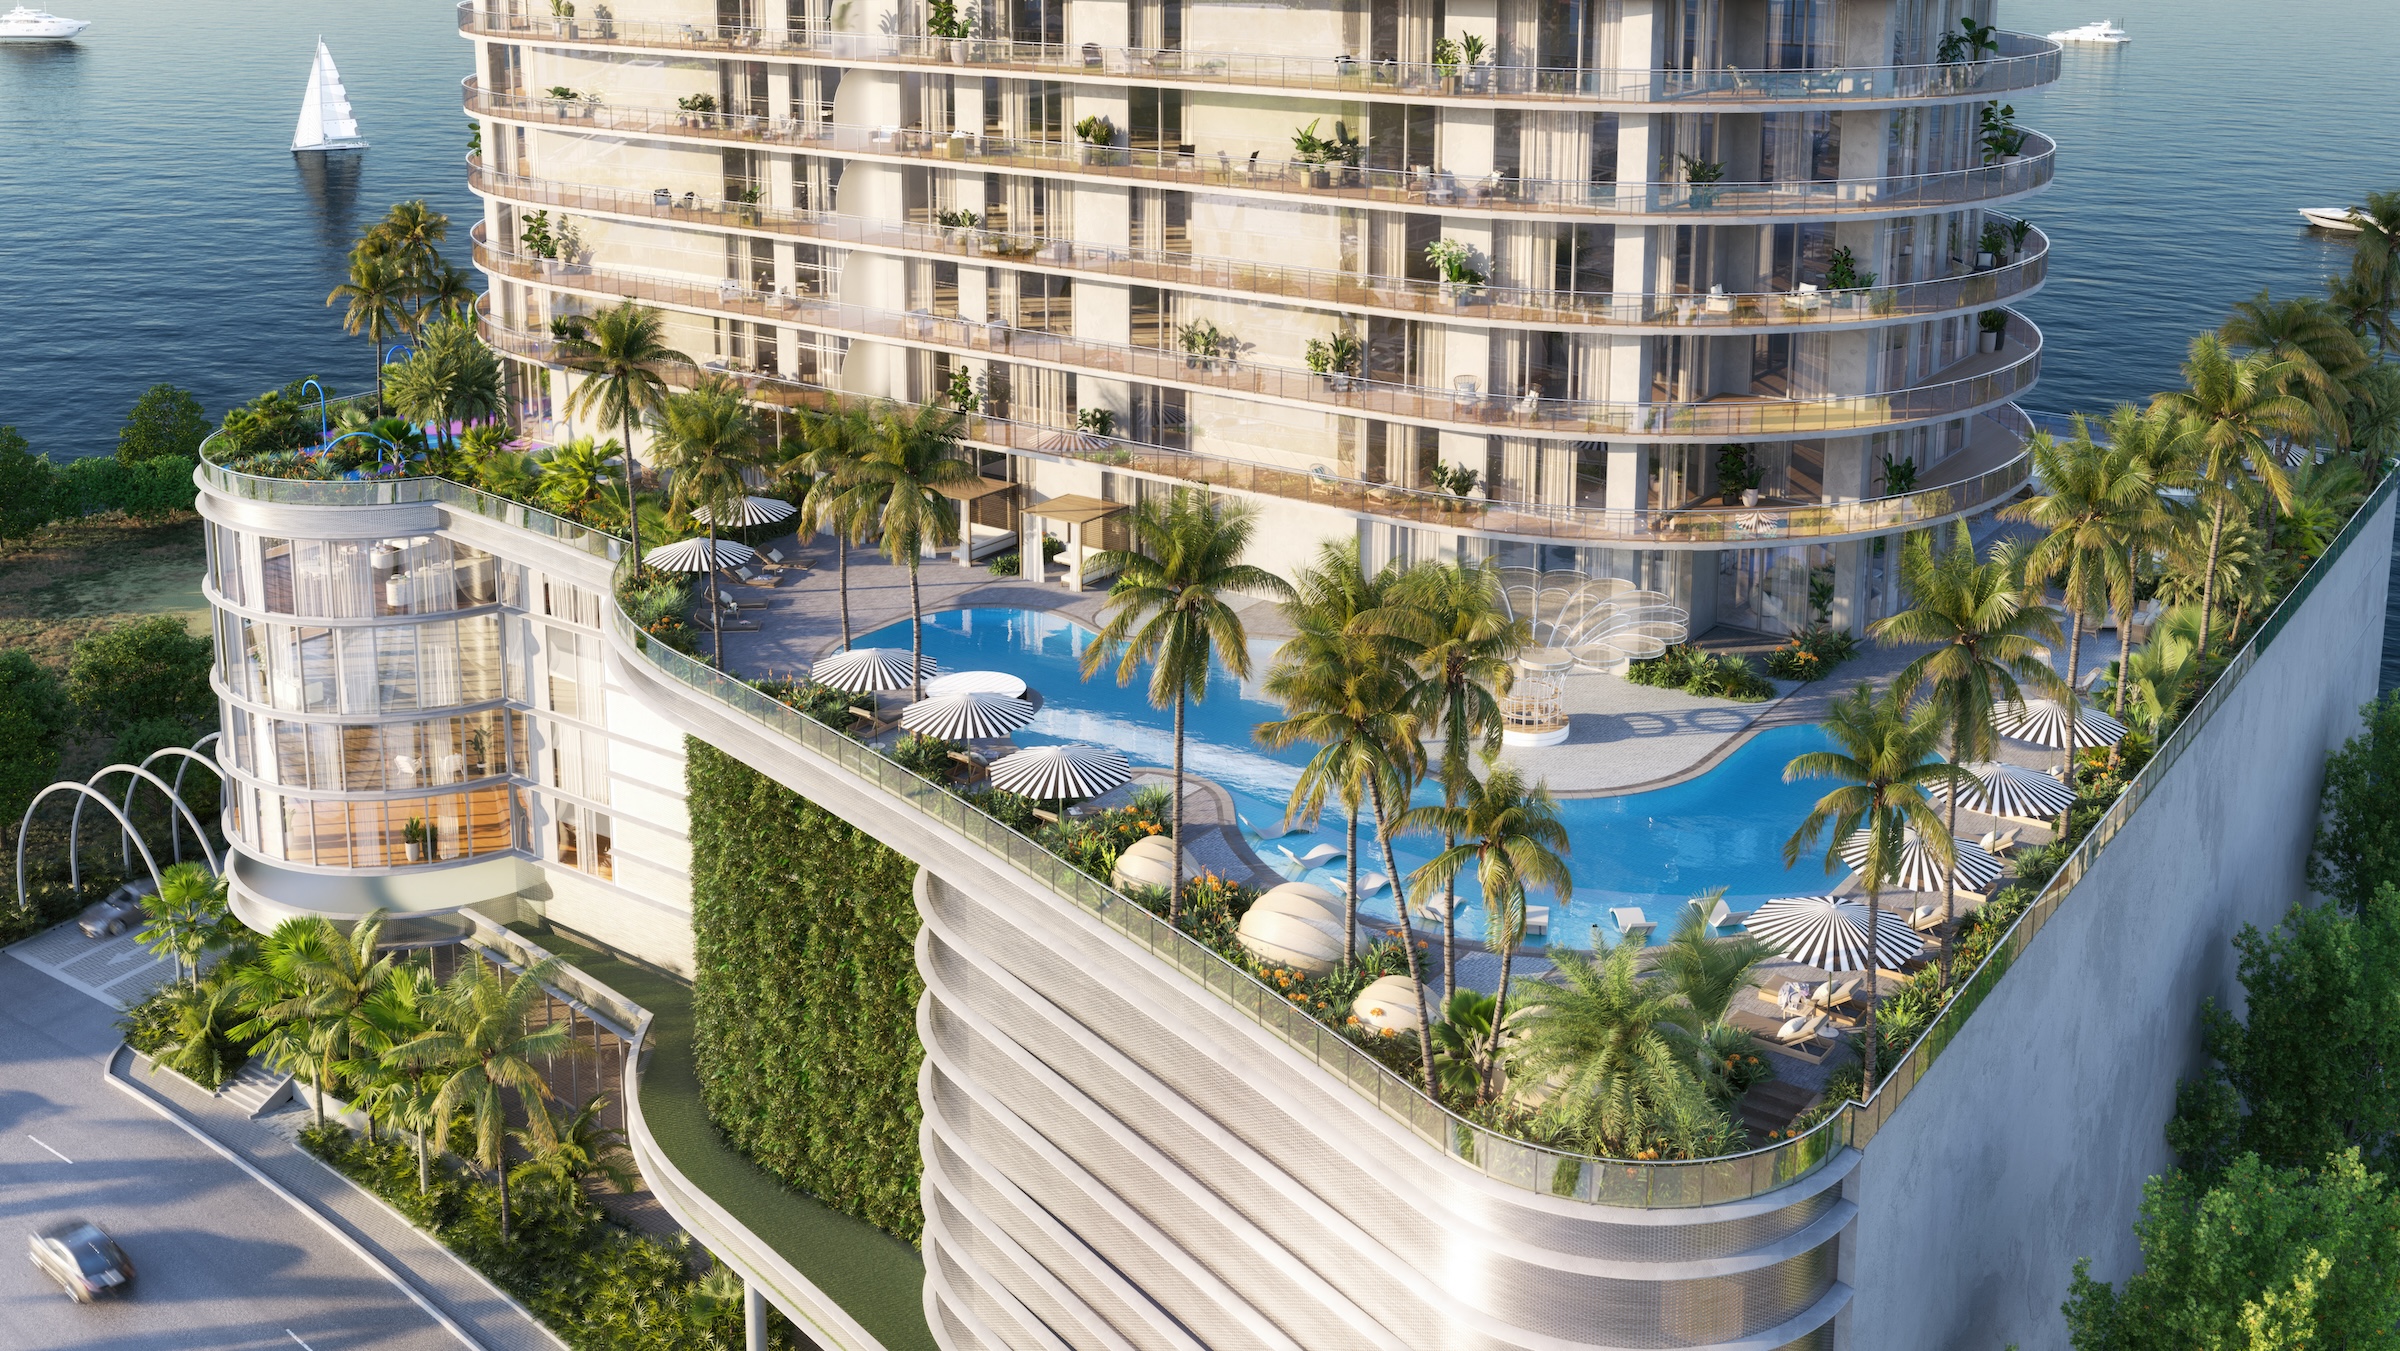 The luxury residential tower Continuum Club & Residences in Miami will feature more than 50,000 square feet of amenities